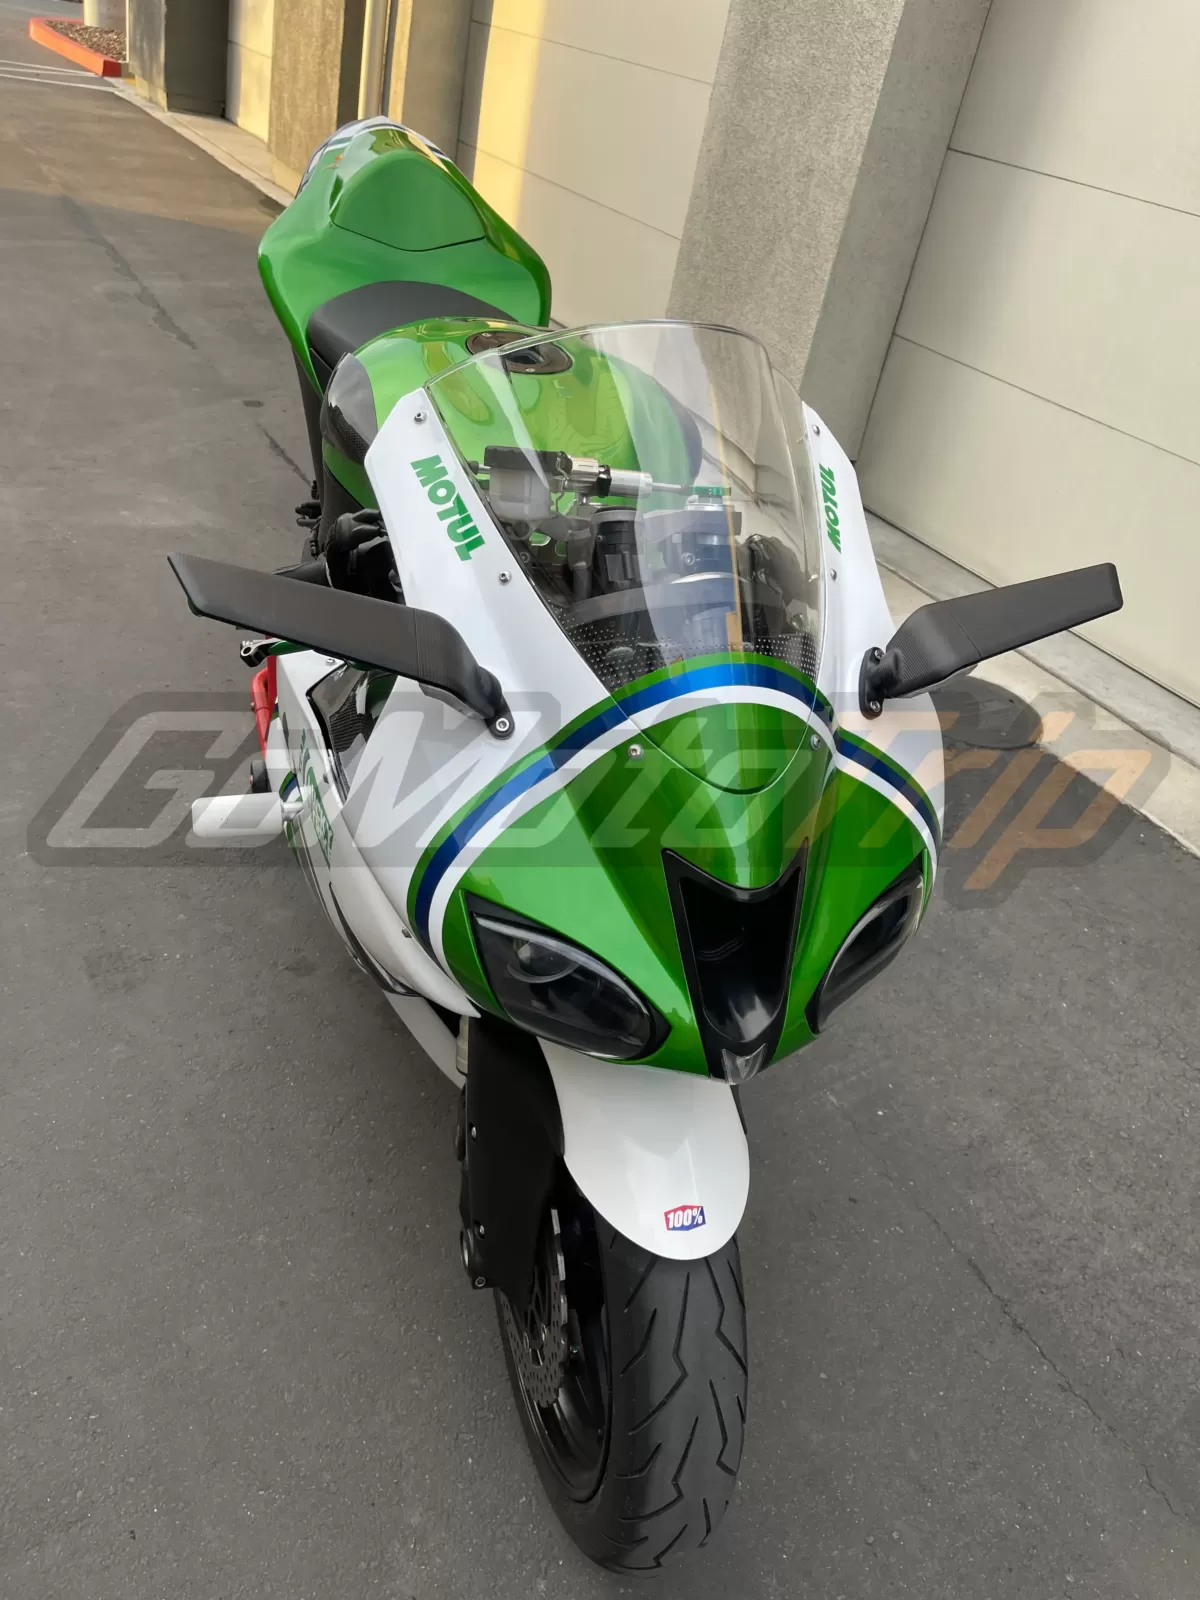 Rider-Review-130599-Mike-ZX6R-Lucky-Strike-DIY-Fairing-3